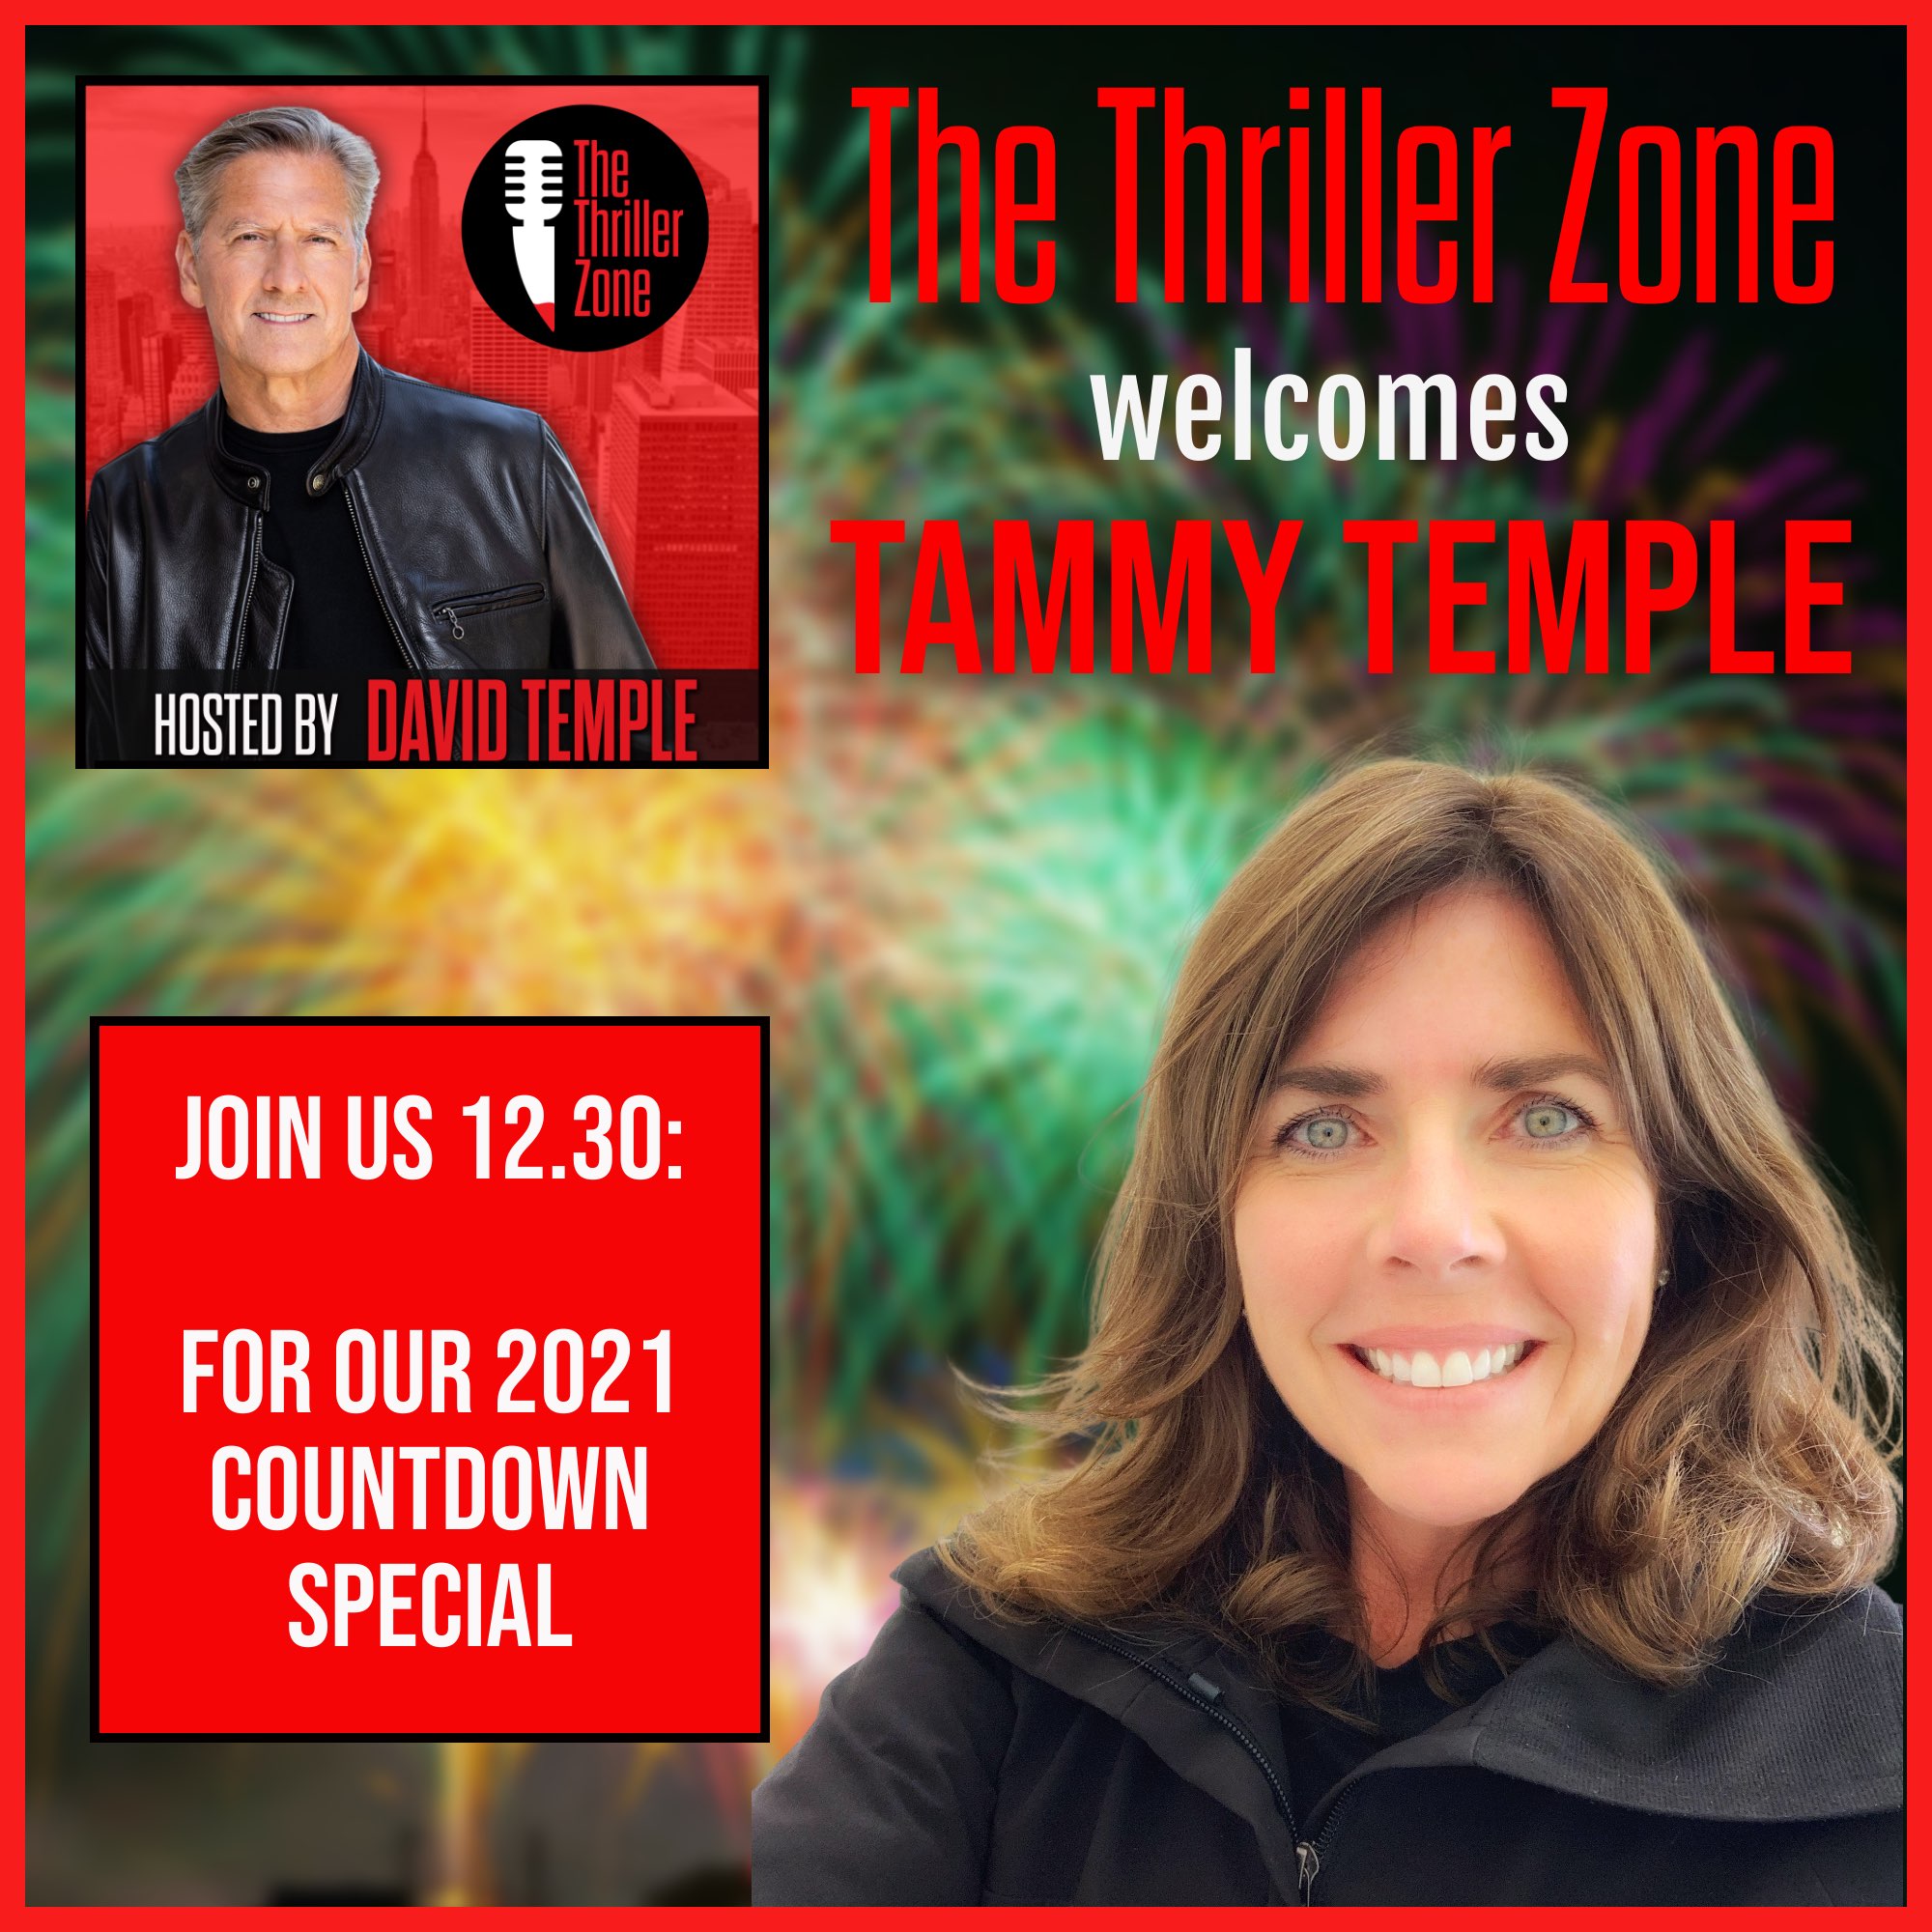 Tammy Temple hosts our 2021 Countdown Image